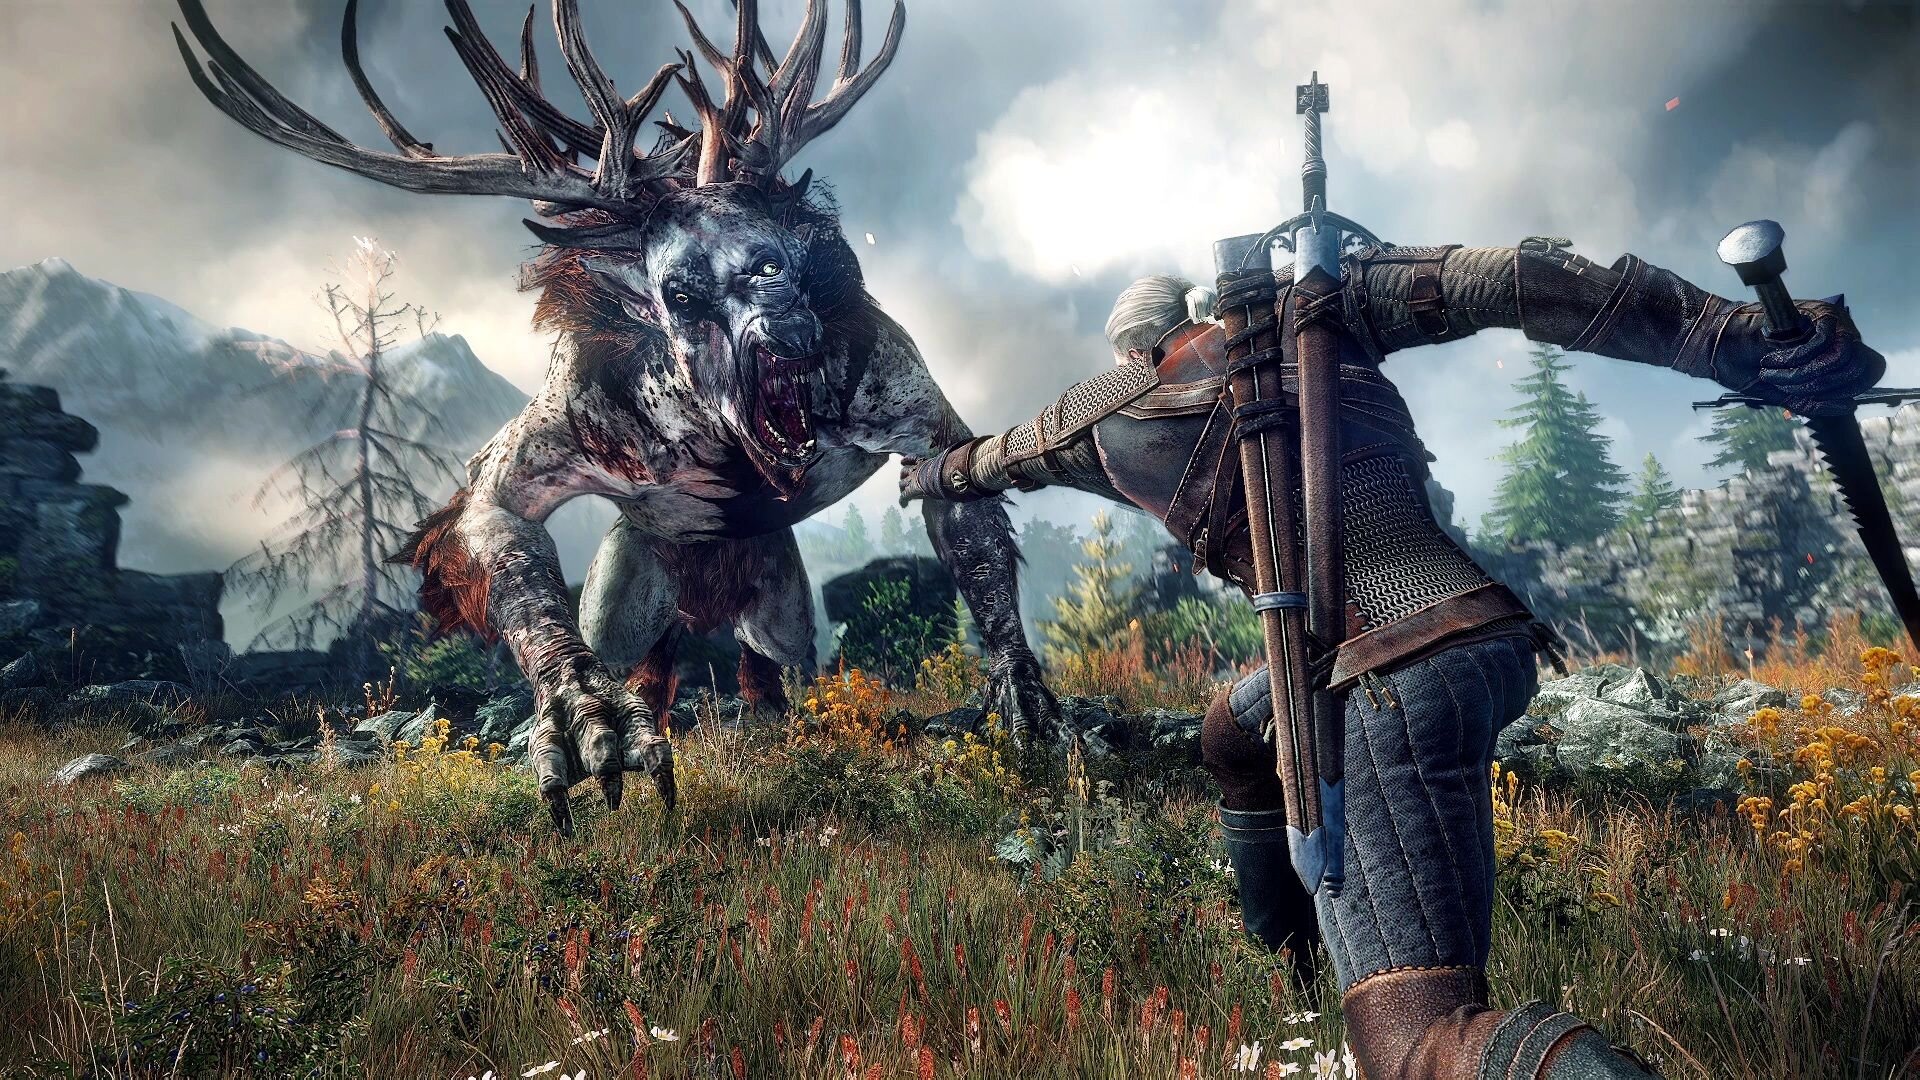 Fans Think The Witcher 3 On Nintendo Switch Will Provide More Graphics Options Via An Upcoming Patch Geektyrant